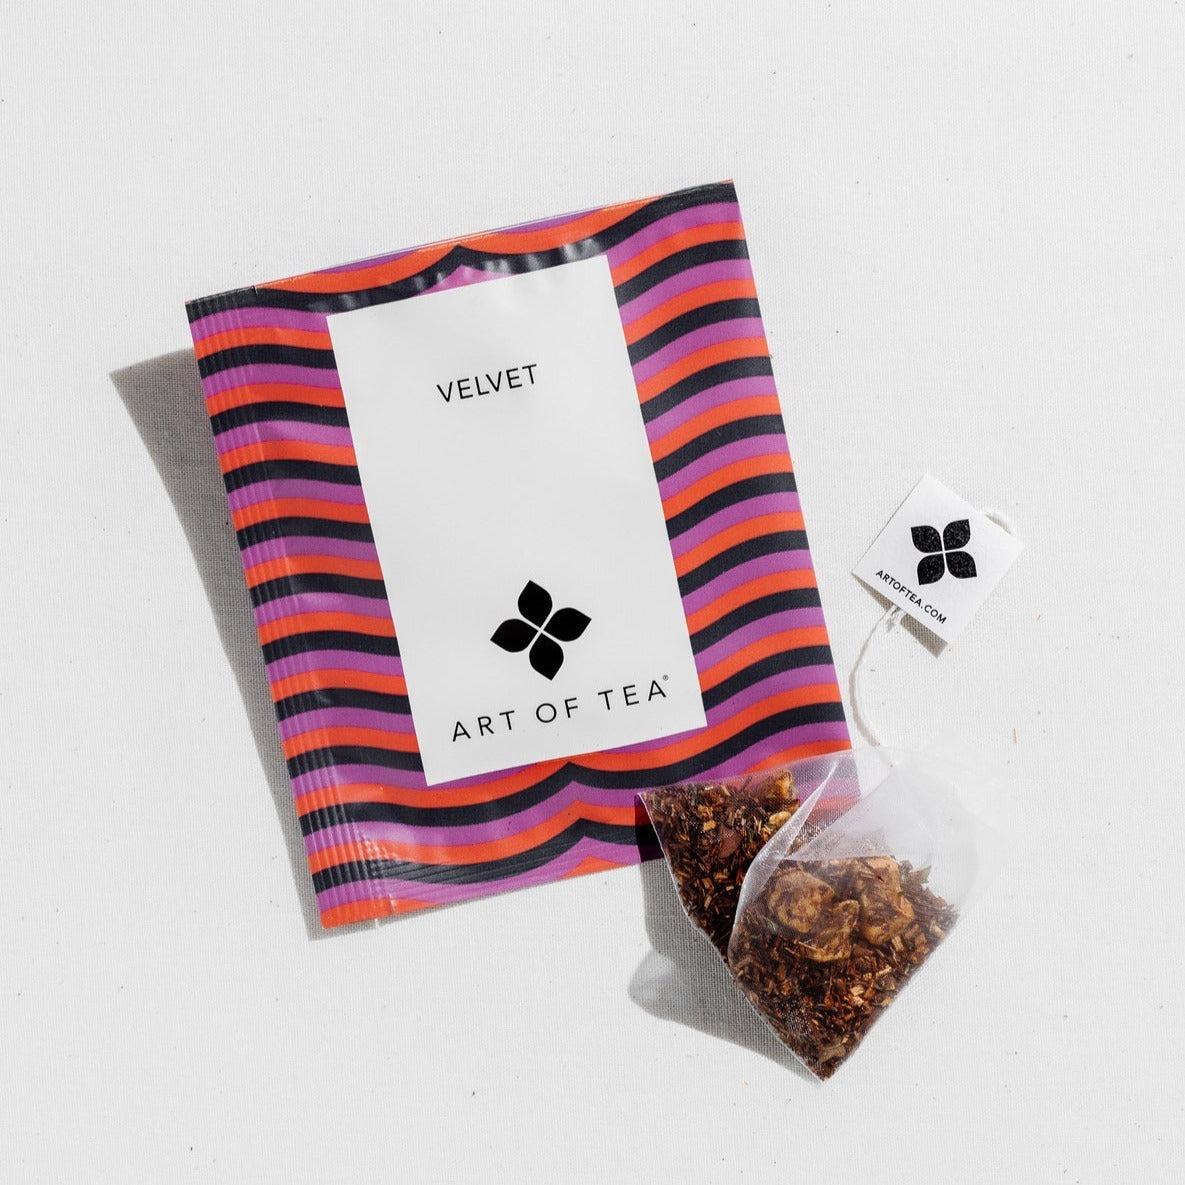 photo of the velvet tea sachet. the velvet tea sachet features black, purple, and red lines across the front of the packaging. it is laying on a white background. 